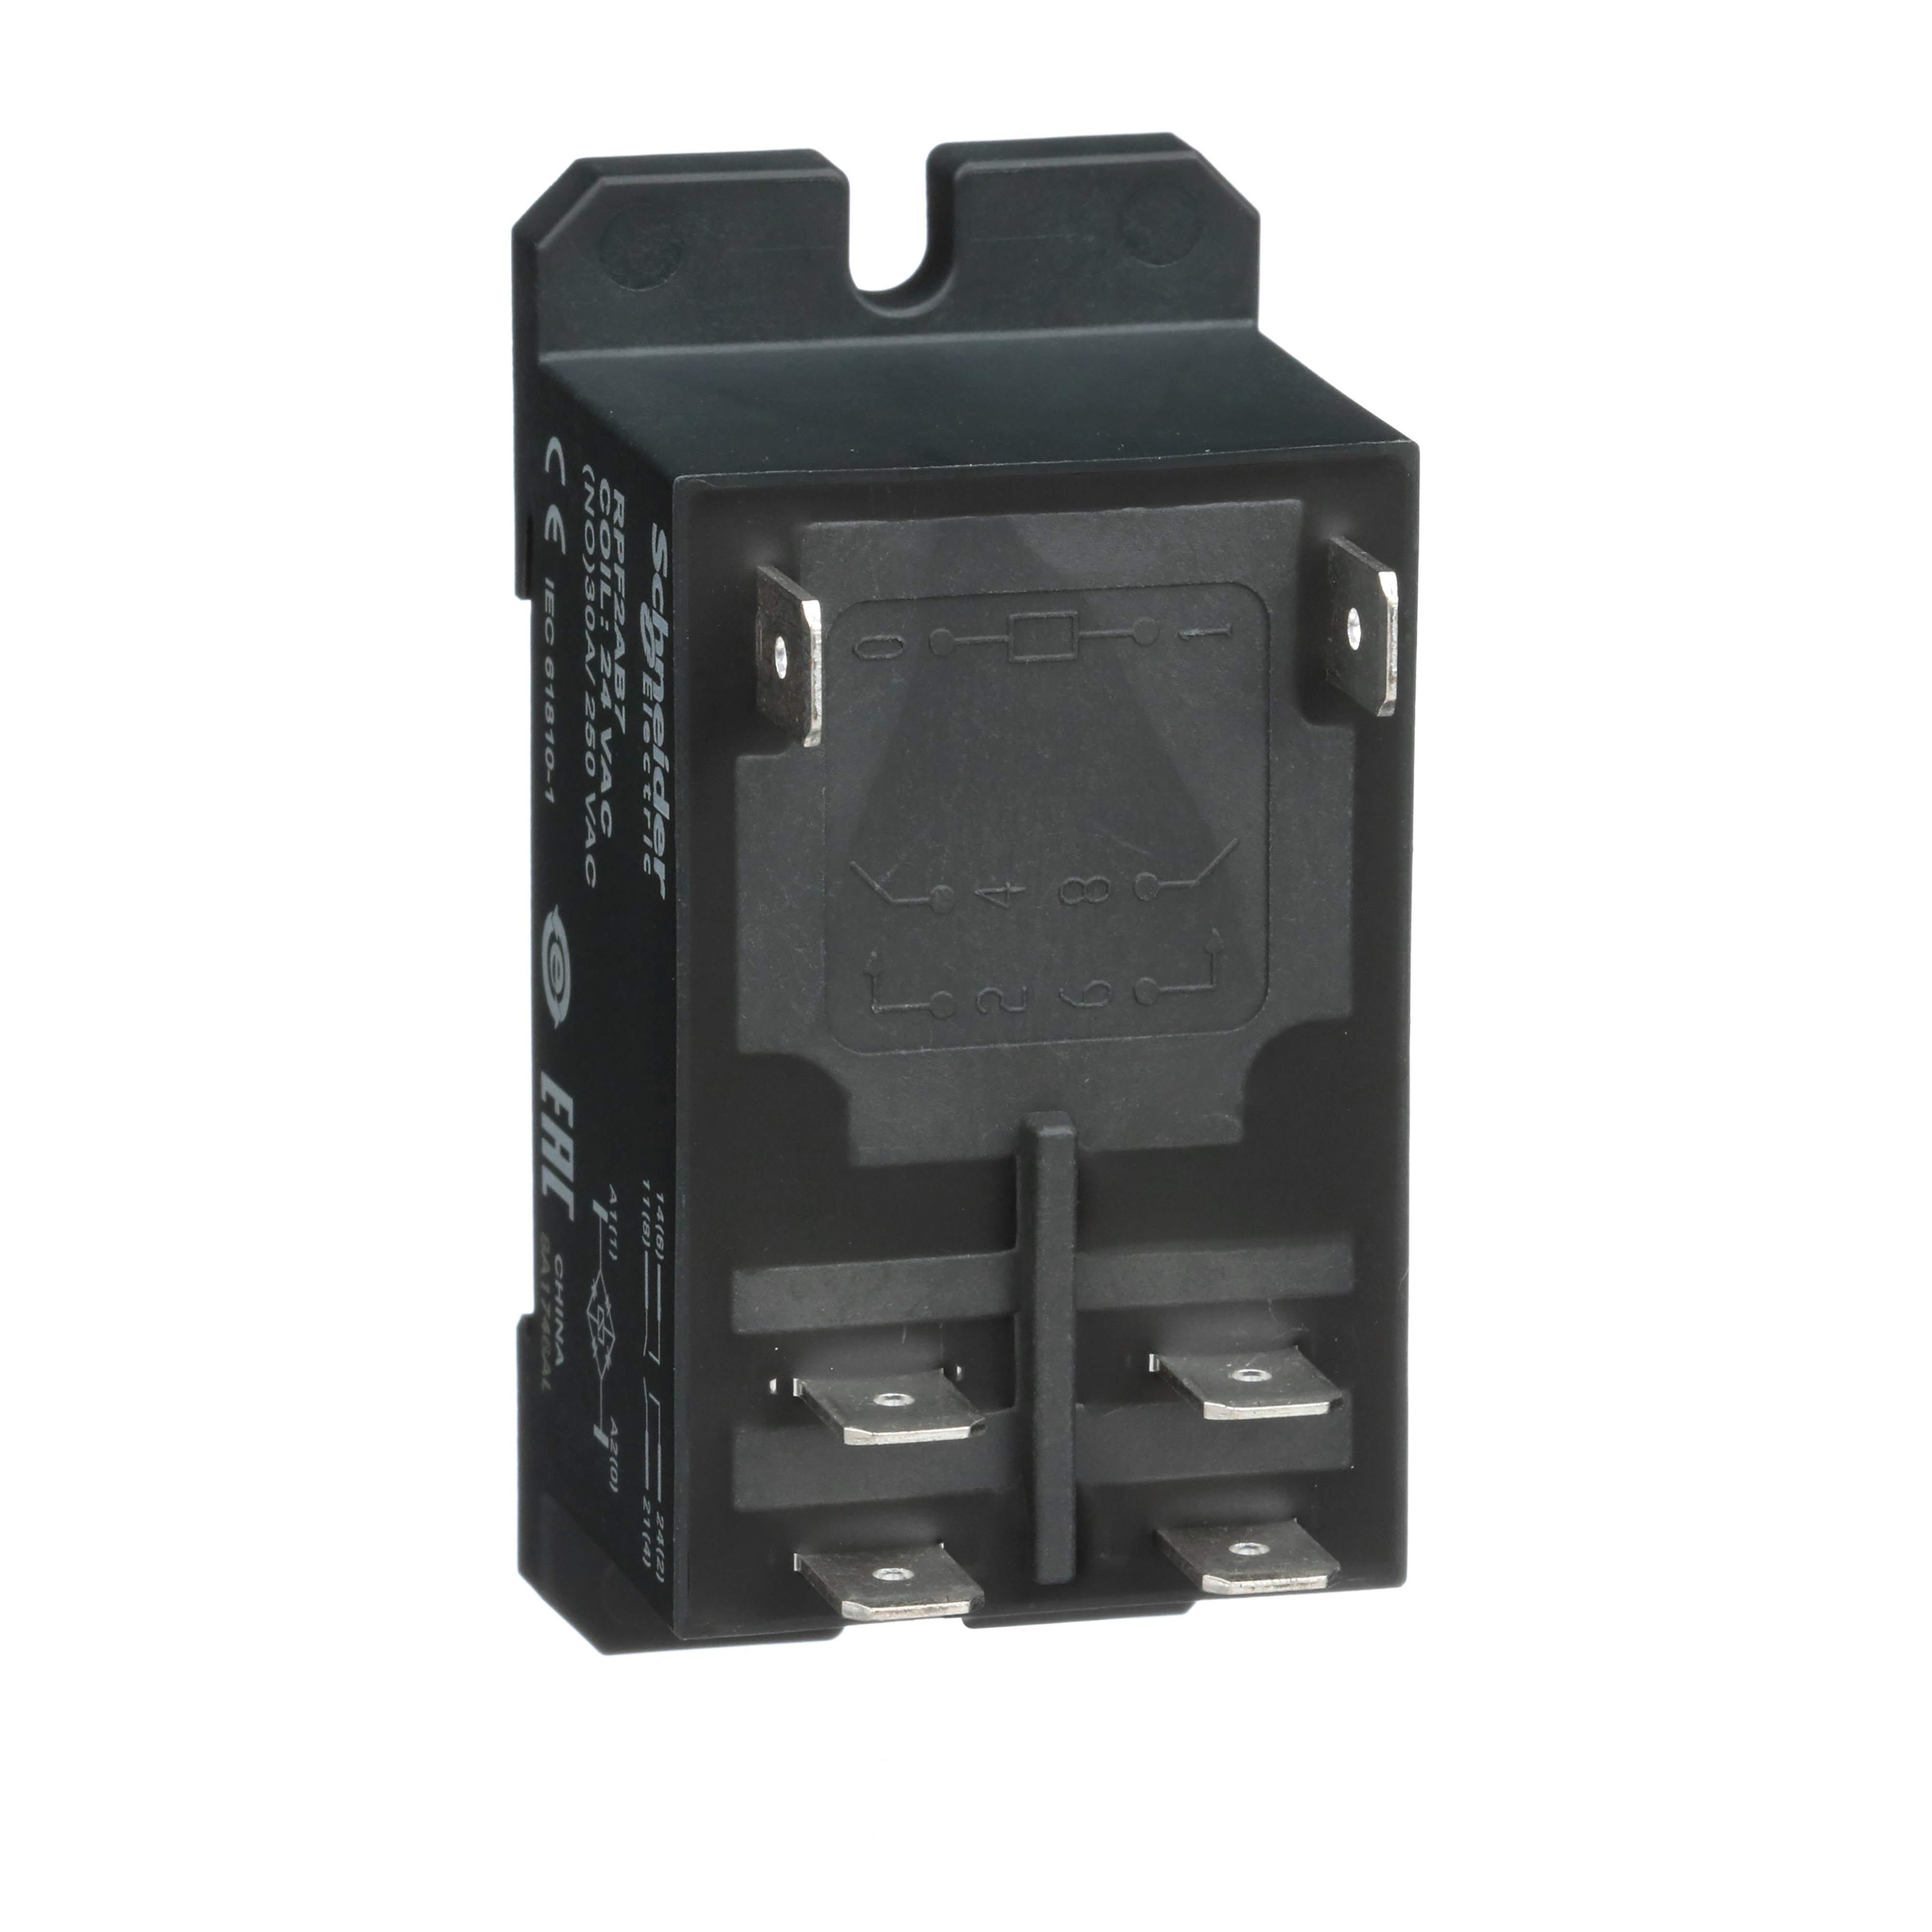 power relay, Harmony electromechanical relays, DIN rail or panel mount relay, 30A, 2NO, 24V AC